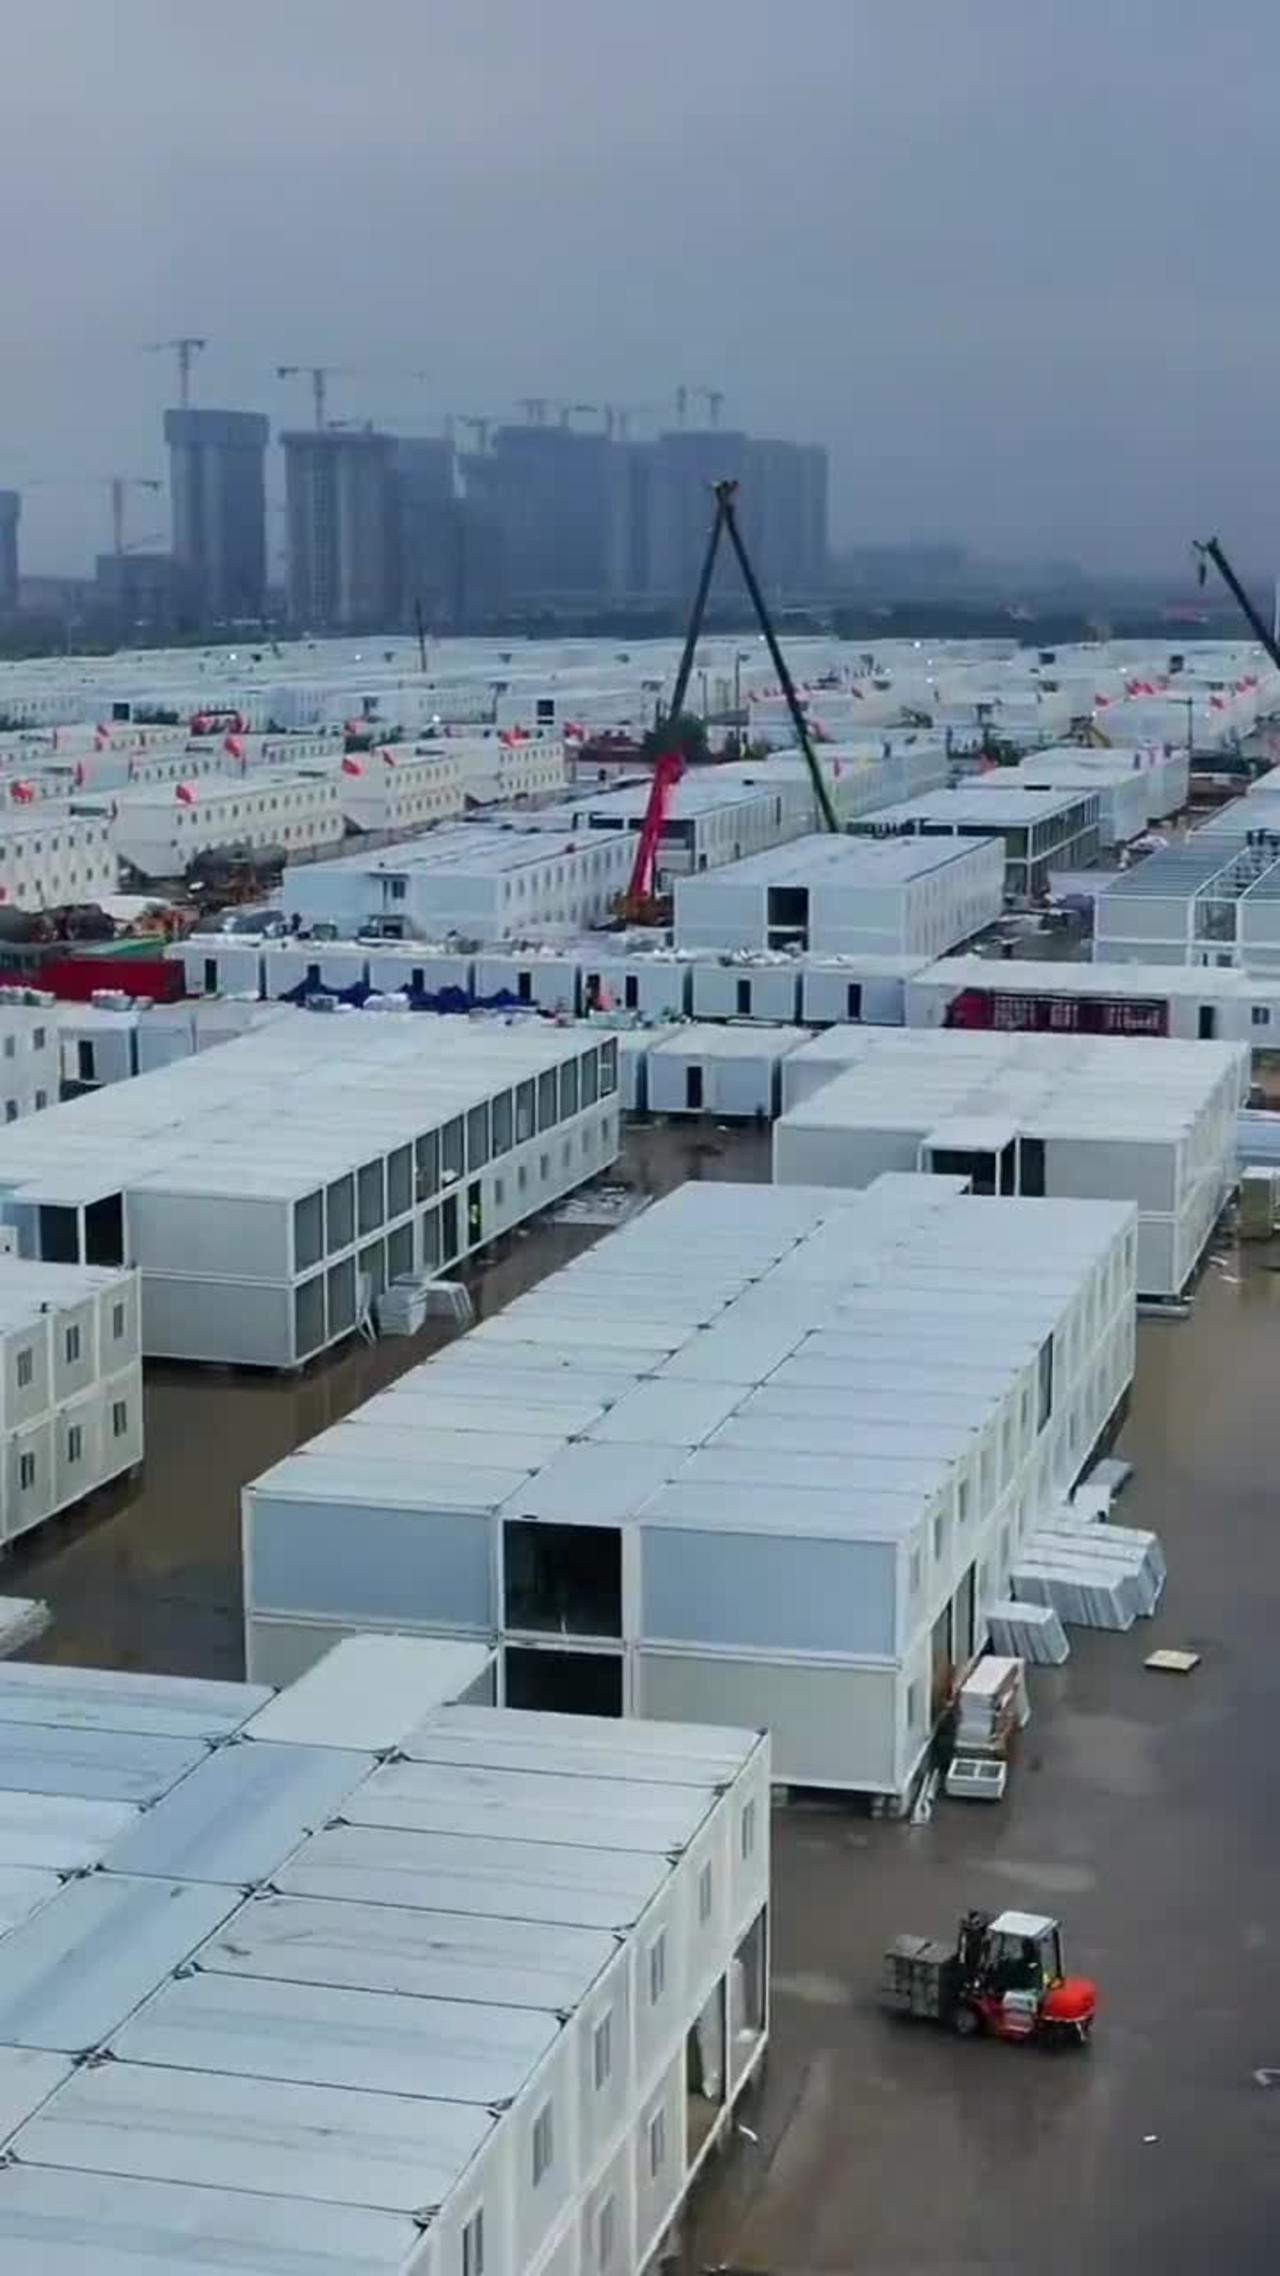 Quarantine camp in China's Guangzhou city is being built with 90,000 isolation pods